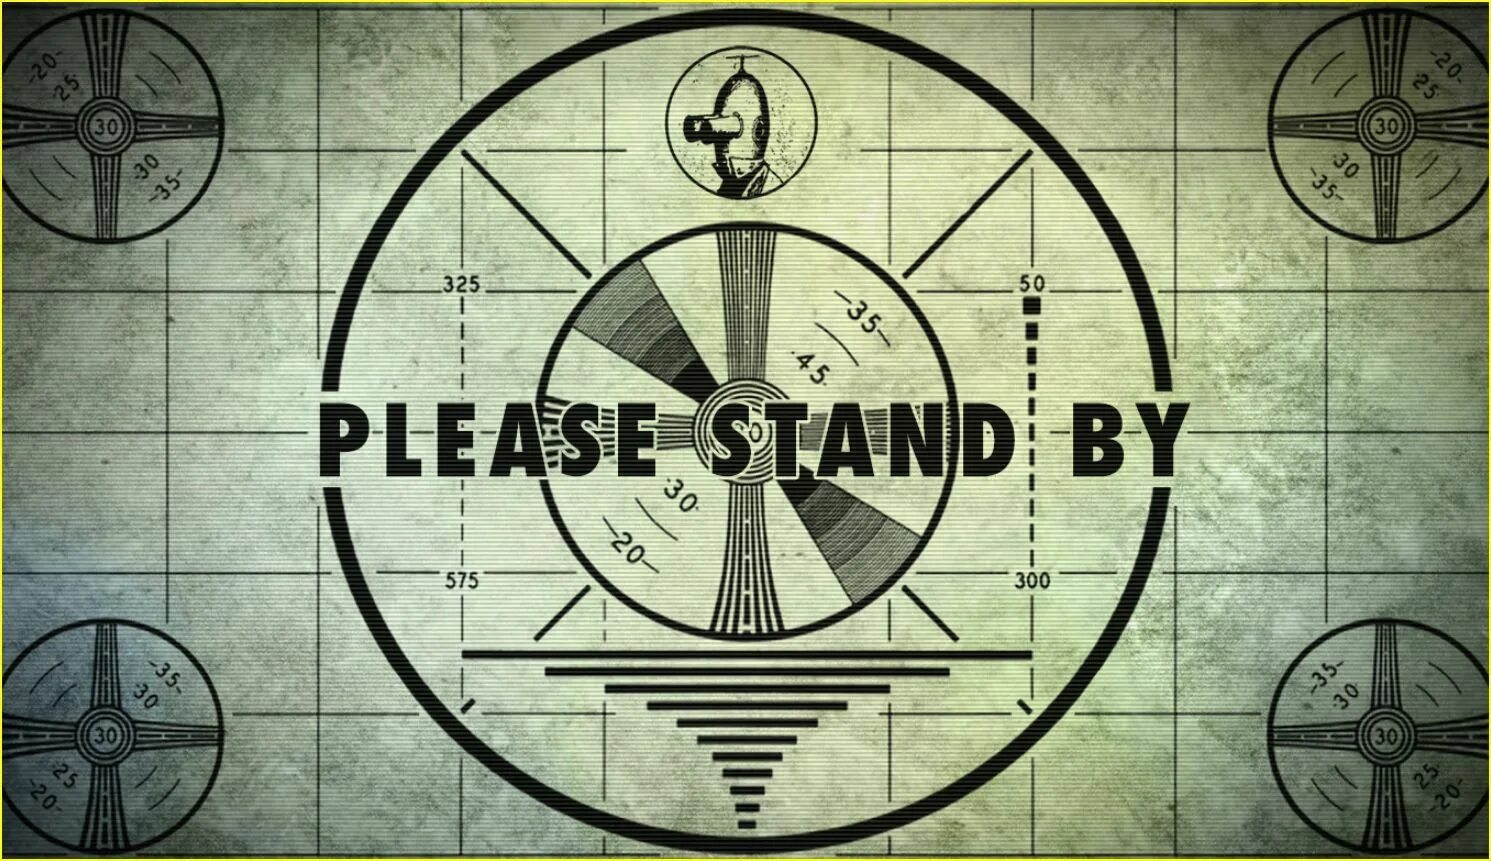 Please Stand by Fallout 3. Please Stand by экран Fallout. Фоллаут please Stand by. Fallout 4 please Stand by. 3 плиз